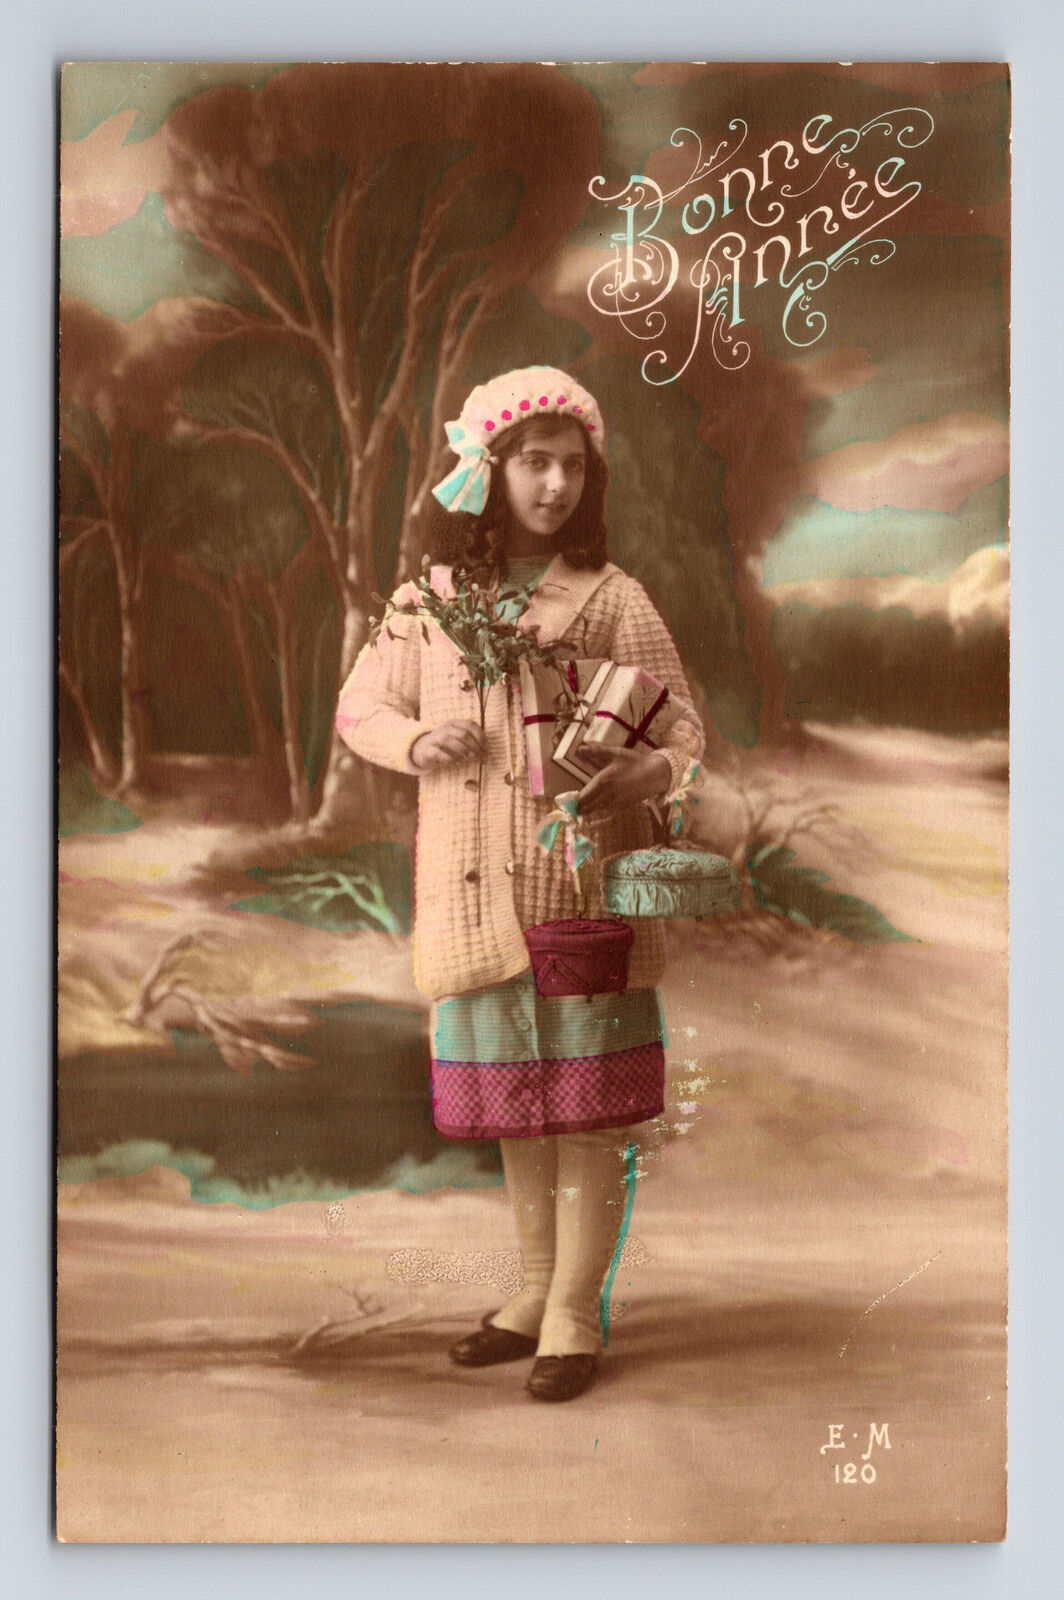 c1915 RPPC French Girl Bonne Annee Gifts Flower Bouquet Hand Tinted Postcard